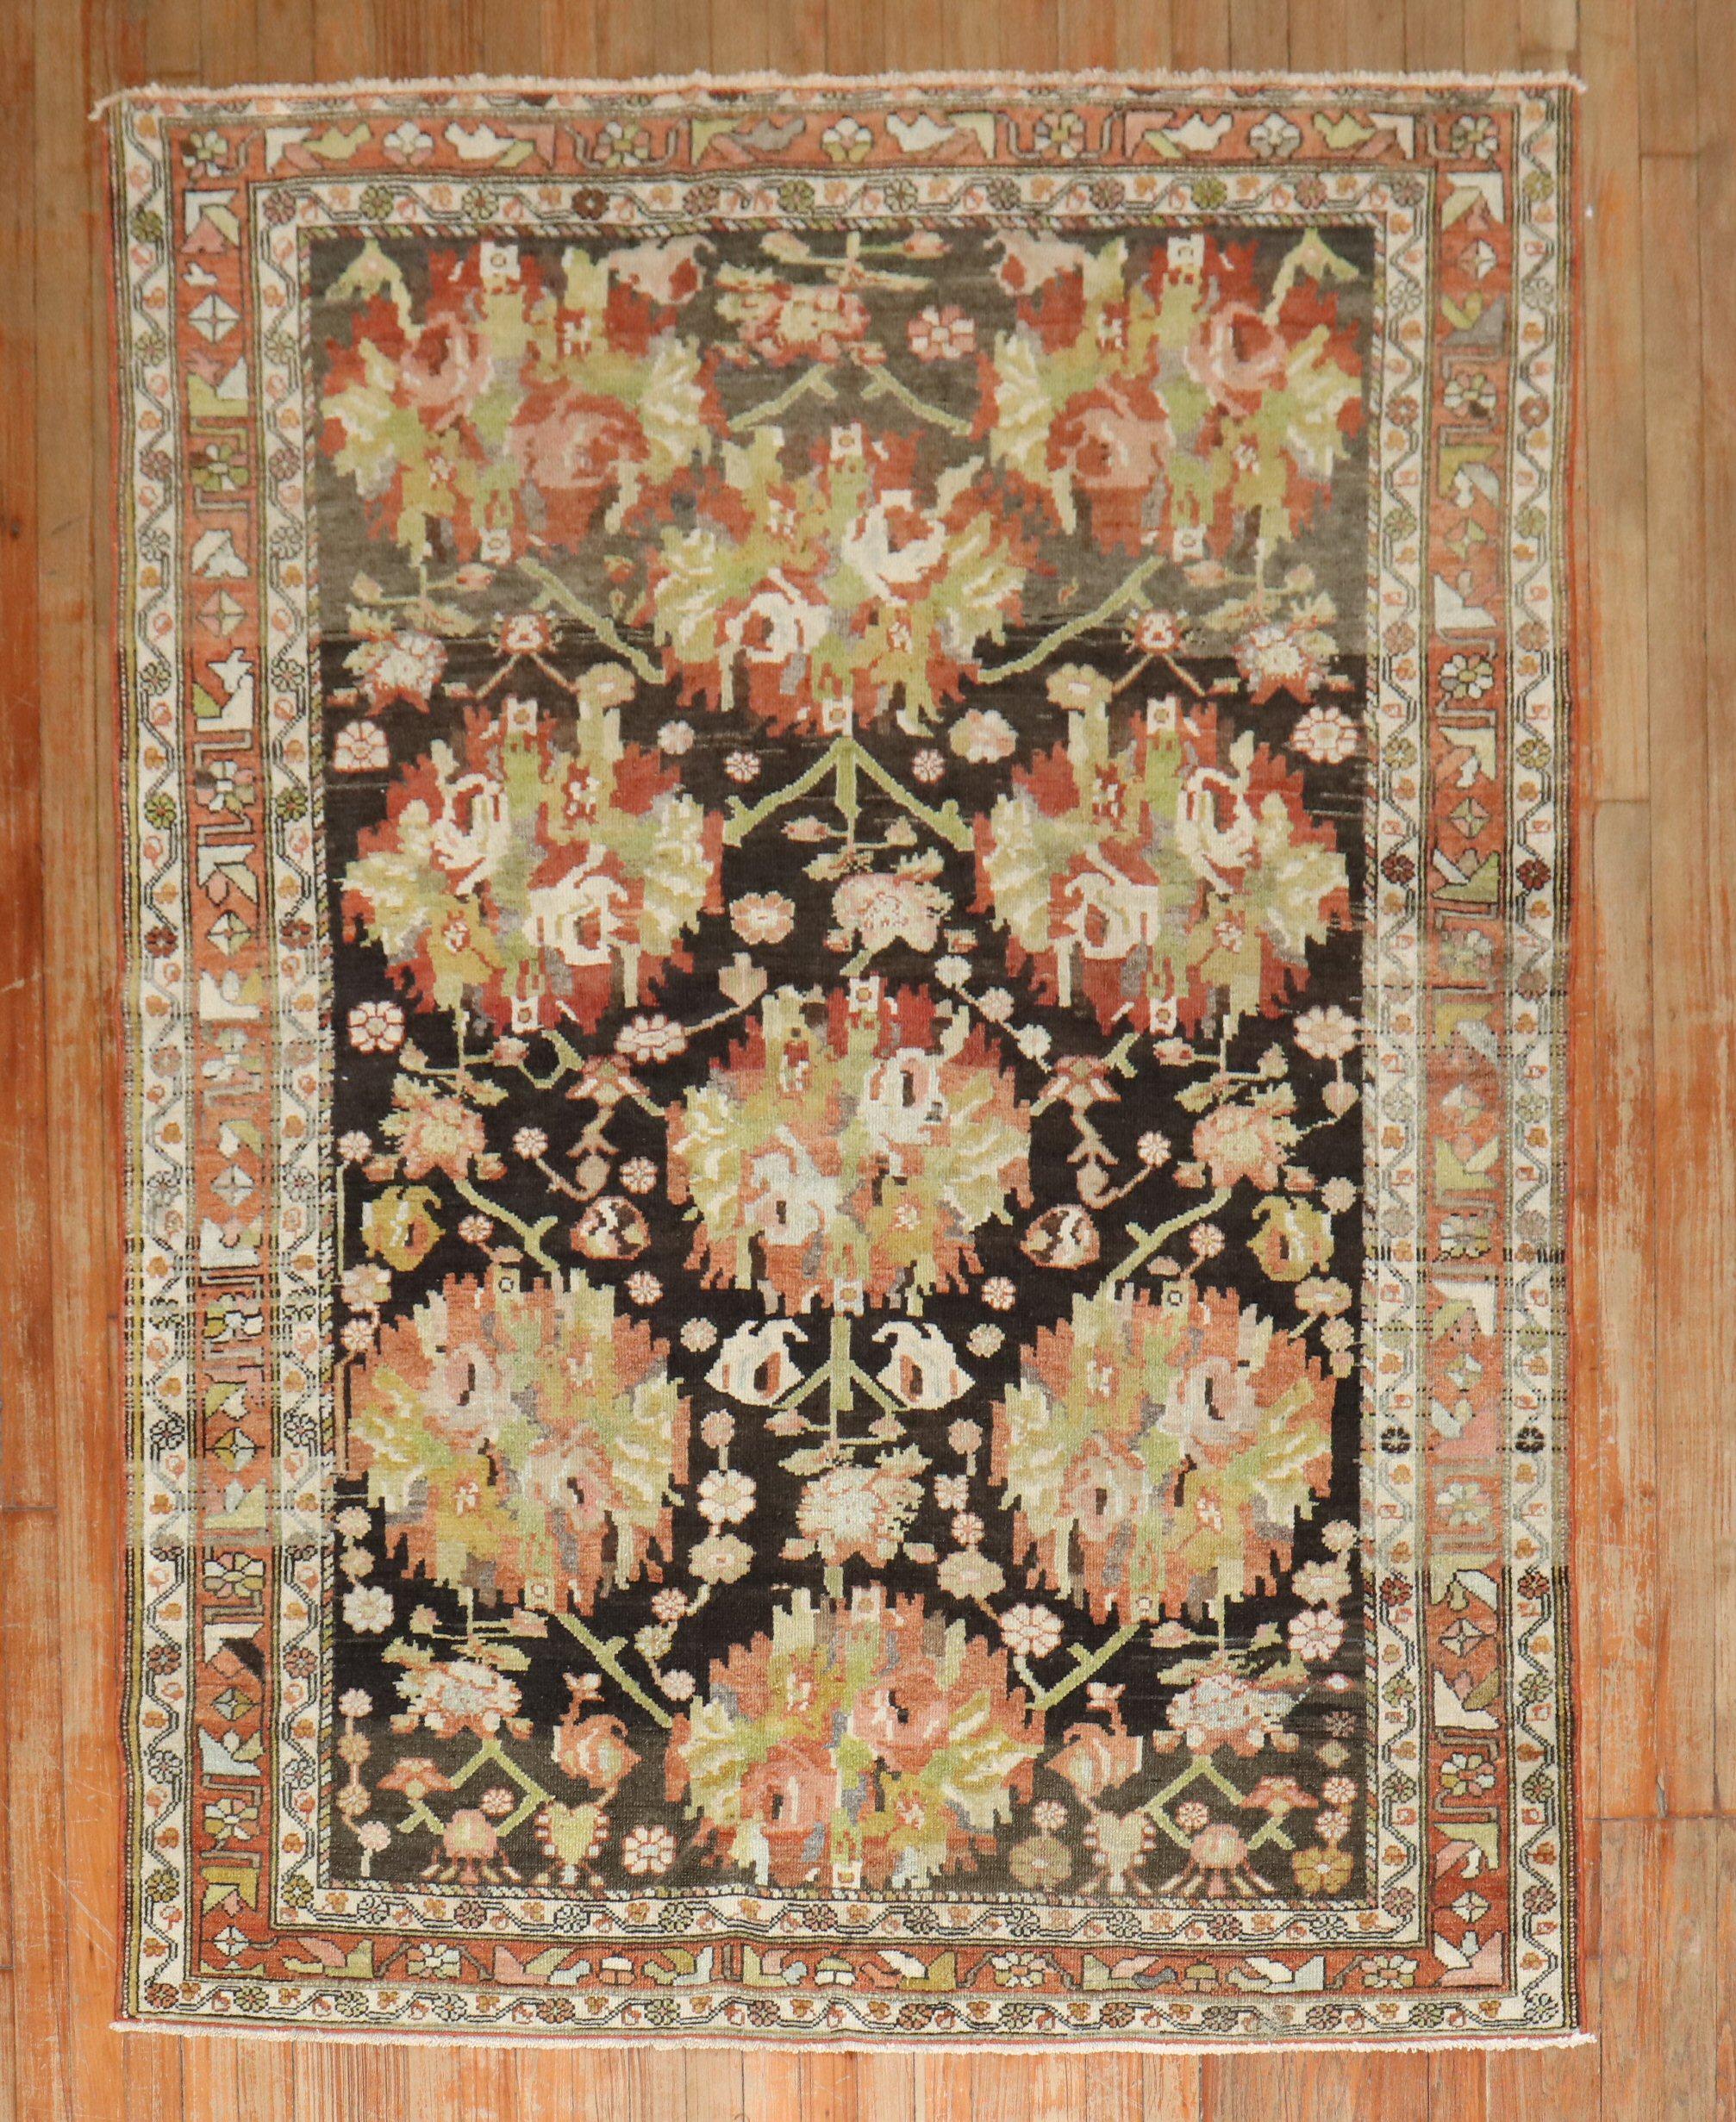 A large accent size early 20th century Persian Malayer rug.

Measures: 4'10